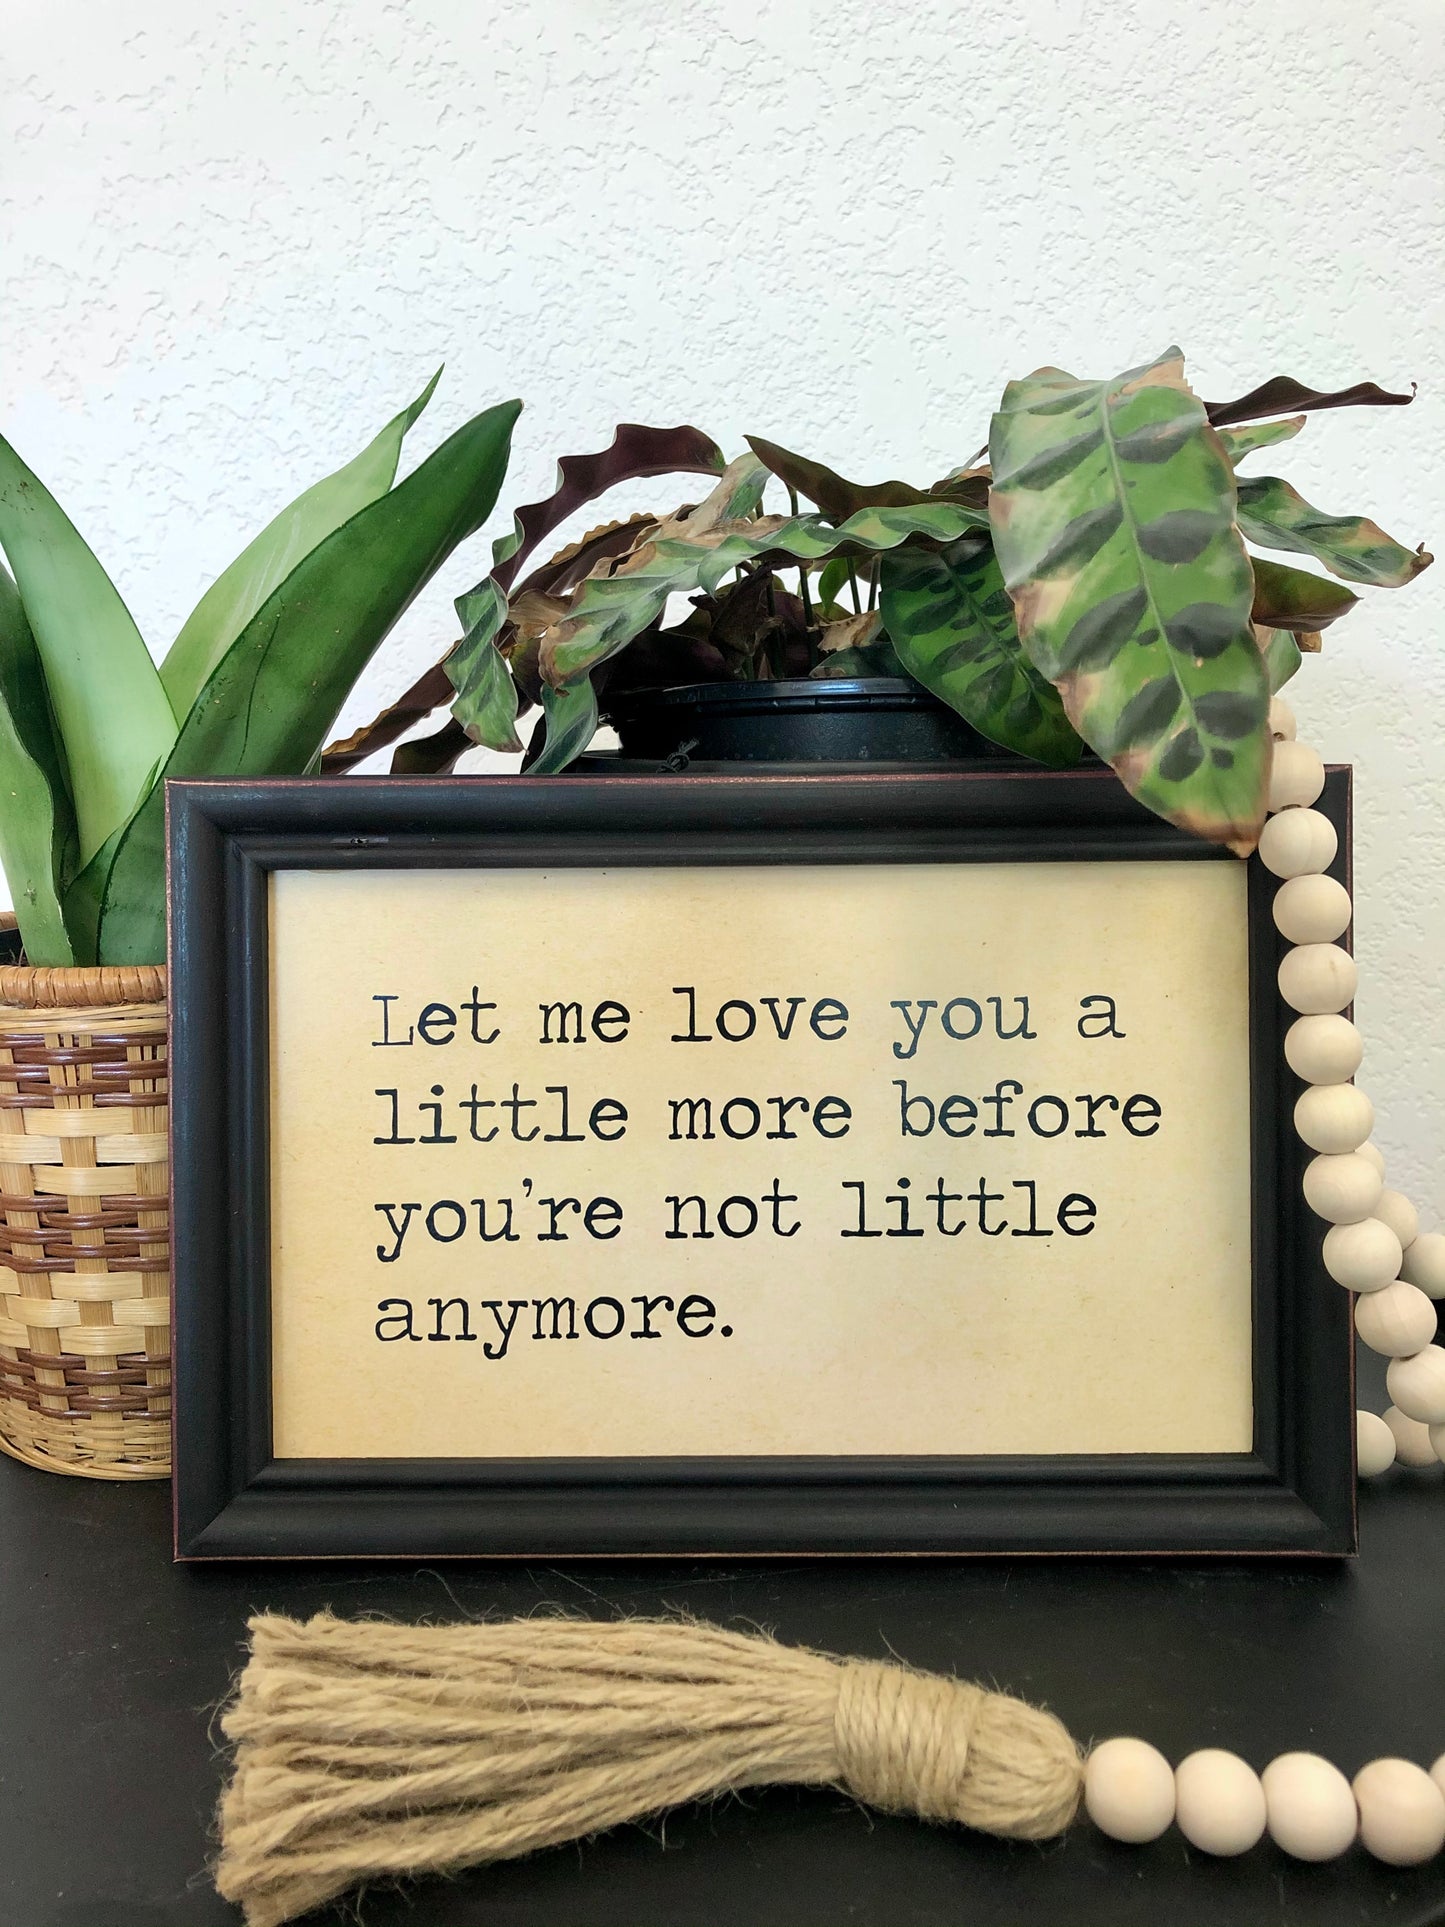 Framed Wall Quote - Let Me Love You